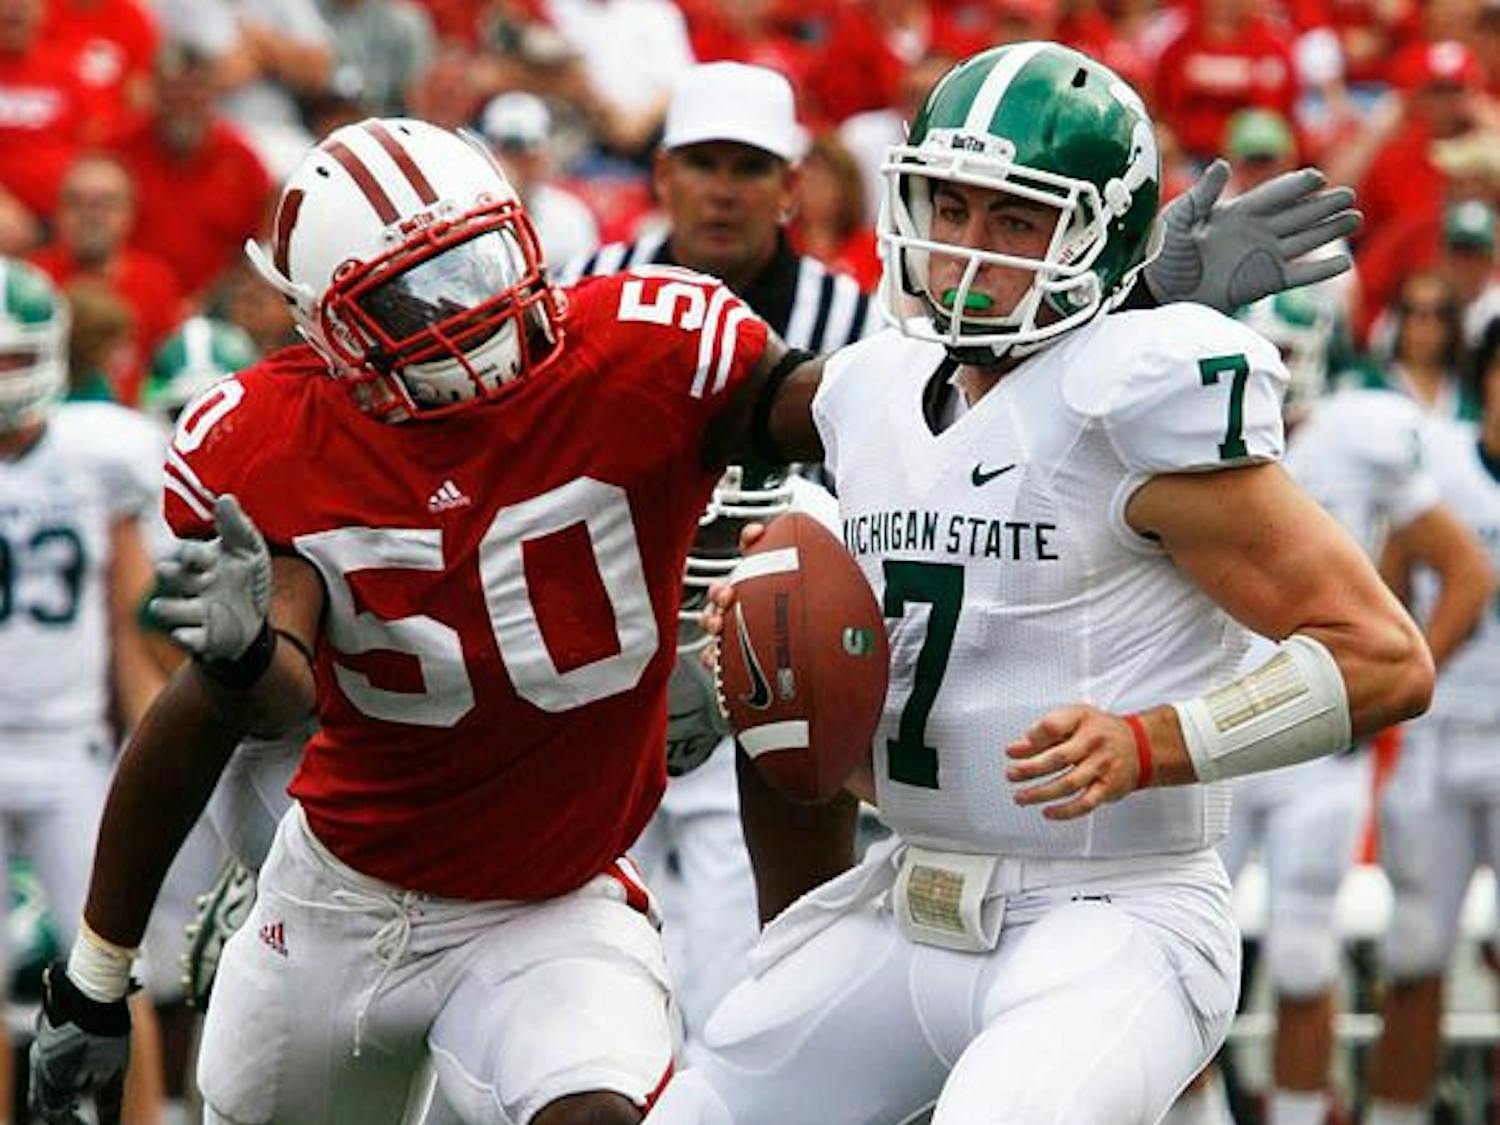 The Spartans defense looks to stifle the Badgers’ running game.